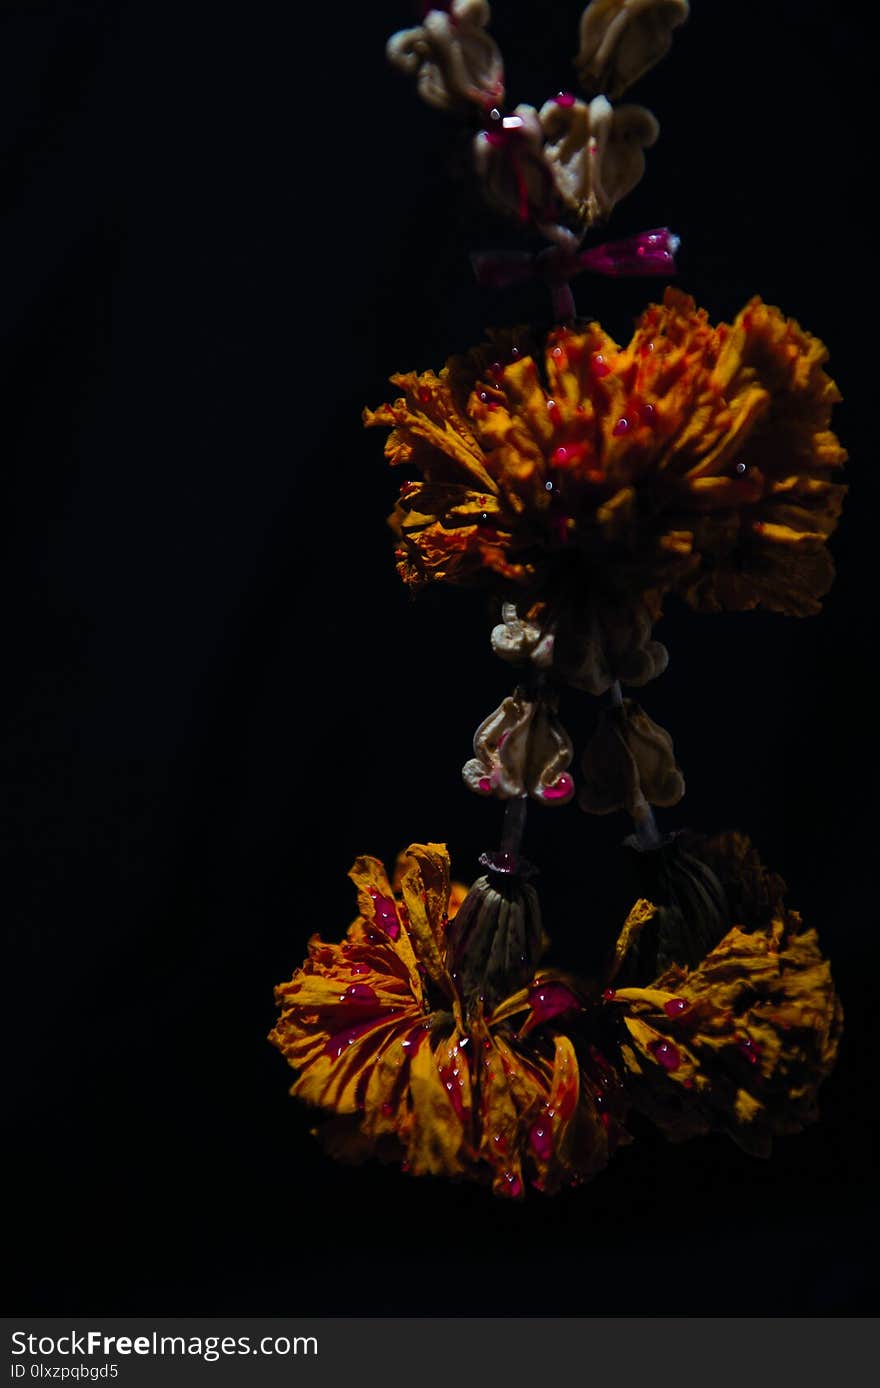 Bleeding with the dried flower garland situate on a black background.